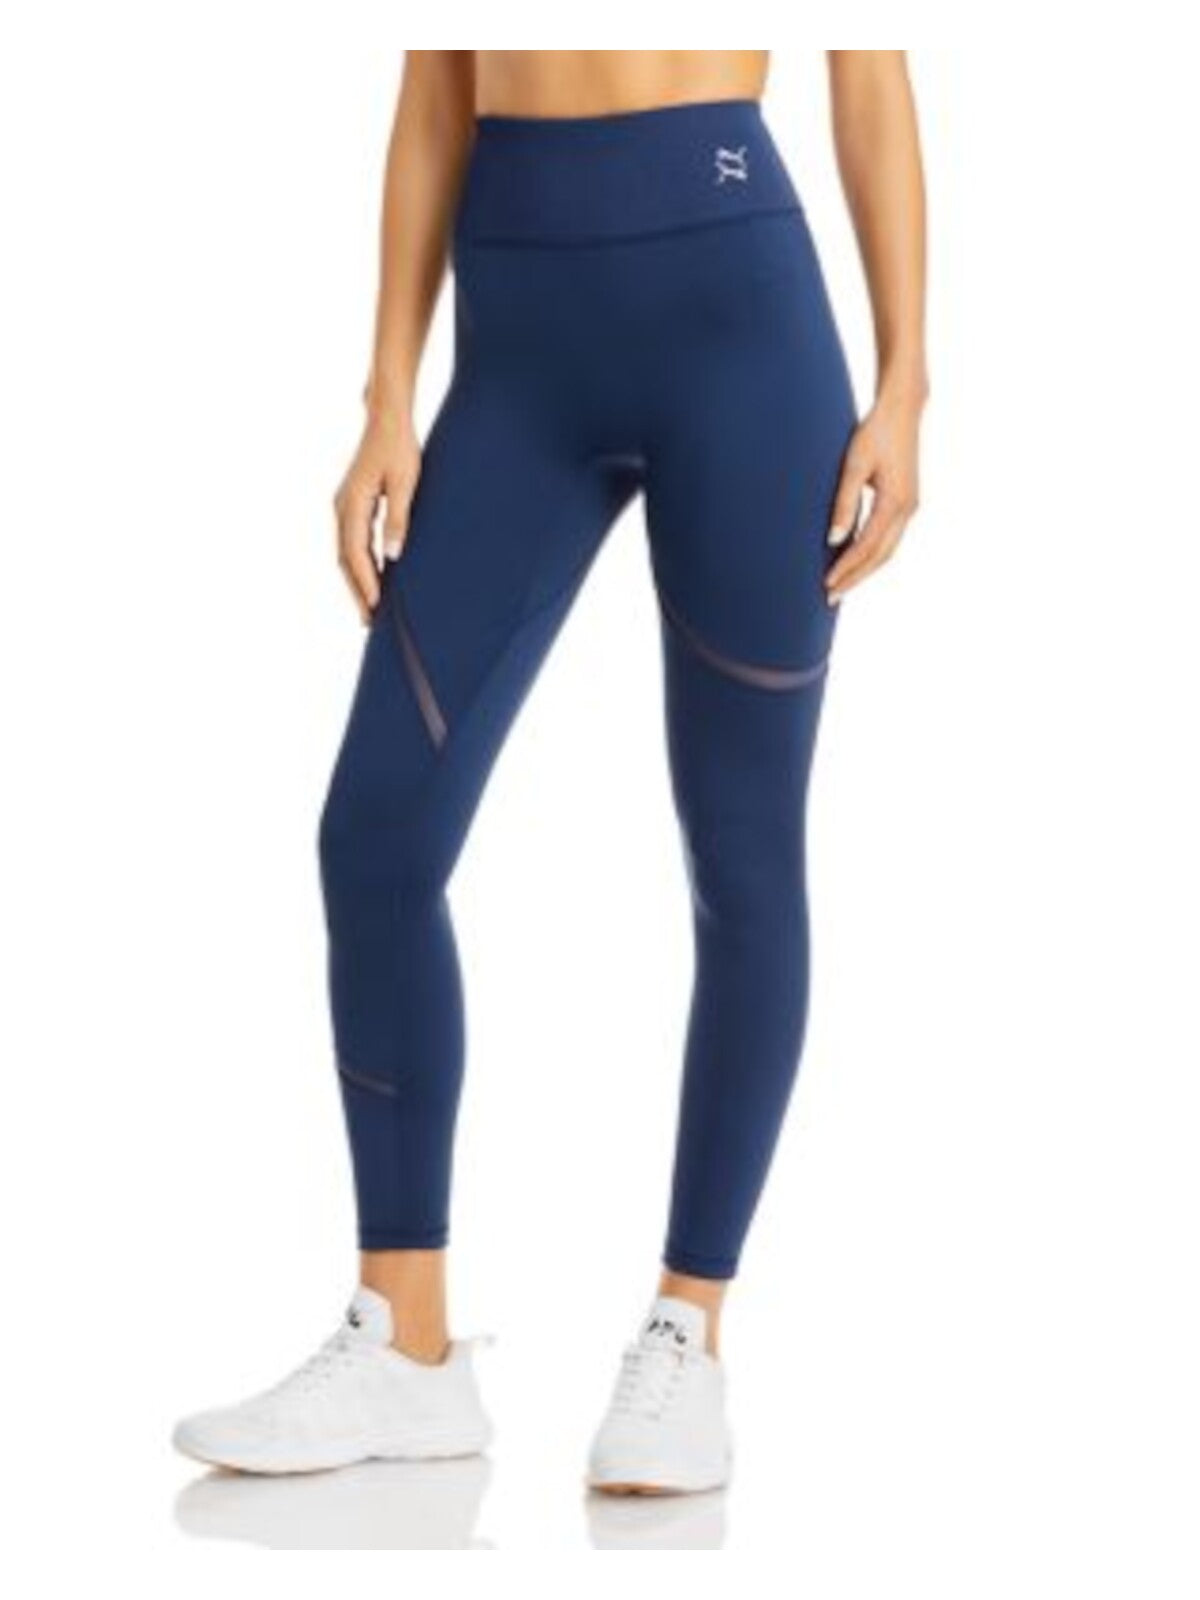 PUMA Womens Blue Stretch Pocketed Mesh Inset Ribbed Waistband Active Wear Skinny Leggings XL